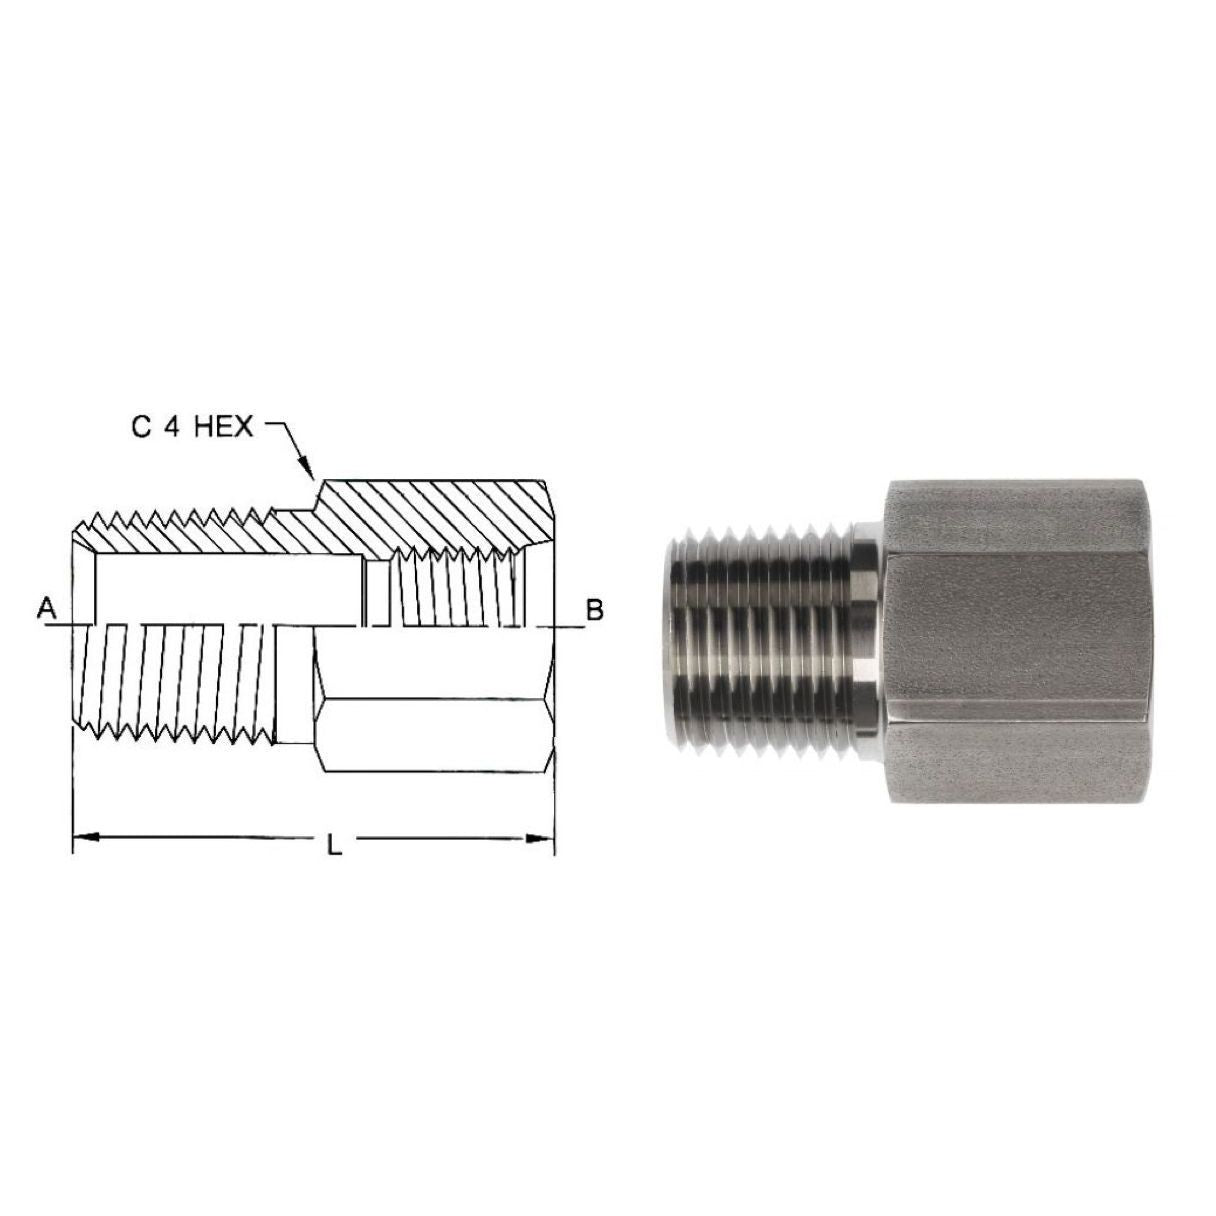 6404-05-04 : OneHydraulics Adapter, Straight, 0.3125 (5/16") Female ORB x 0.25 (1/4") Male, Steel, 6000psi